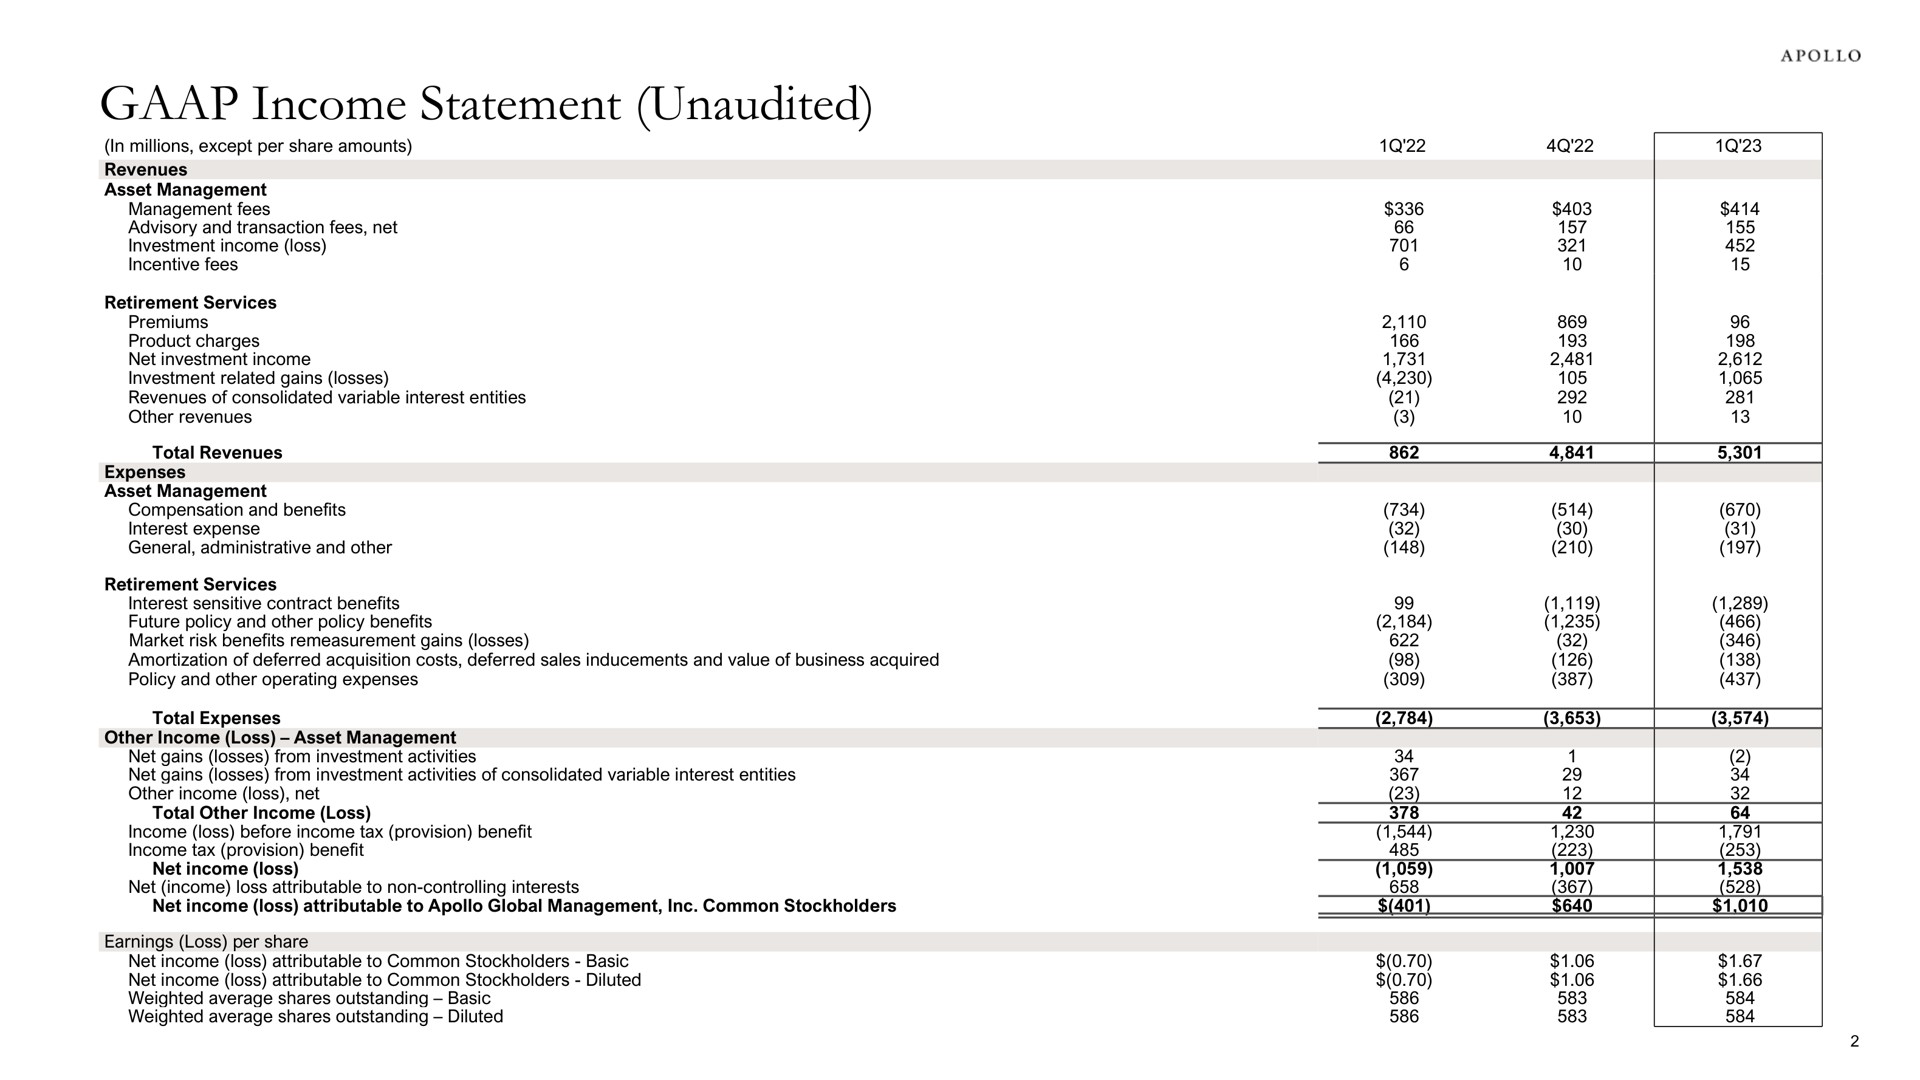 income statement unaudited | Apollo Global Management